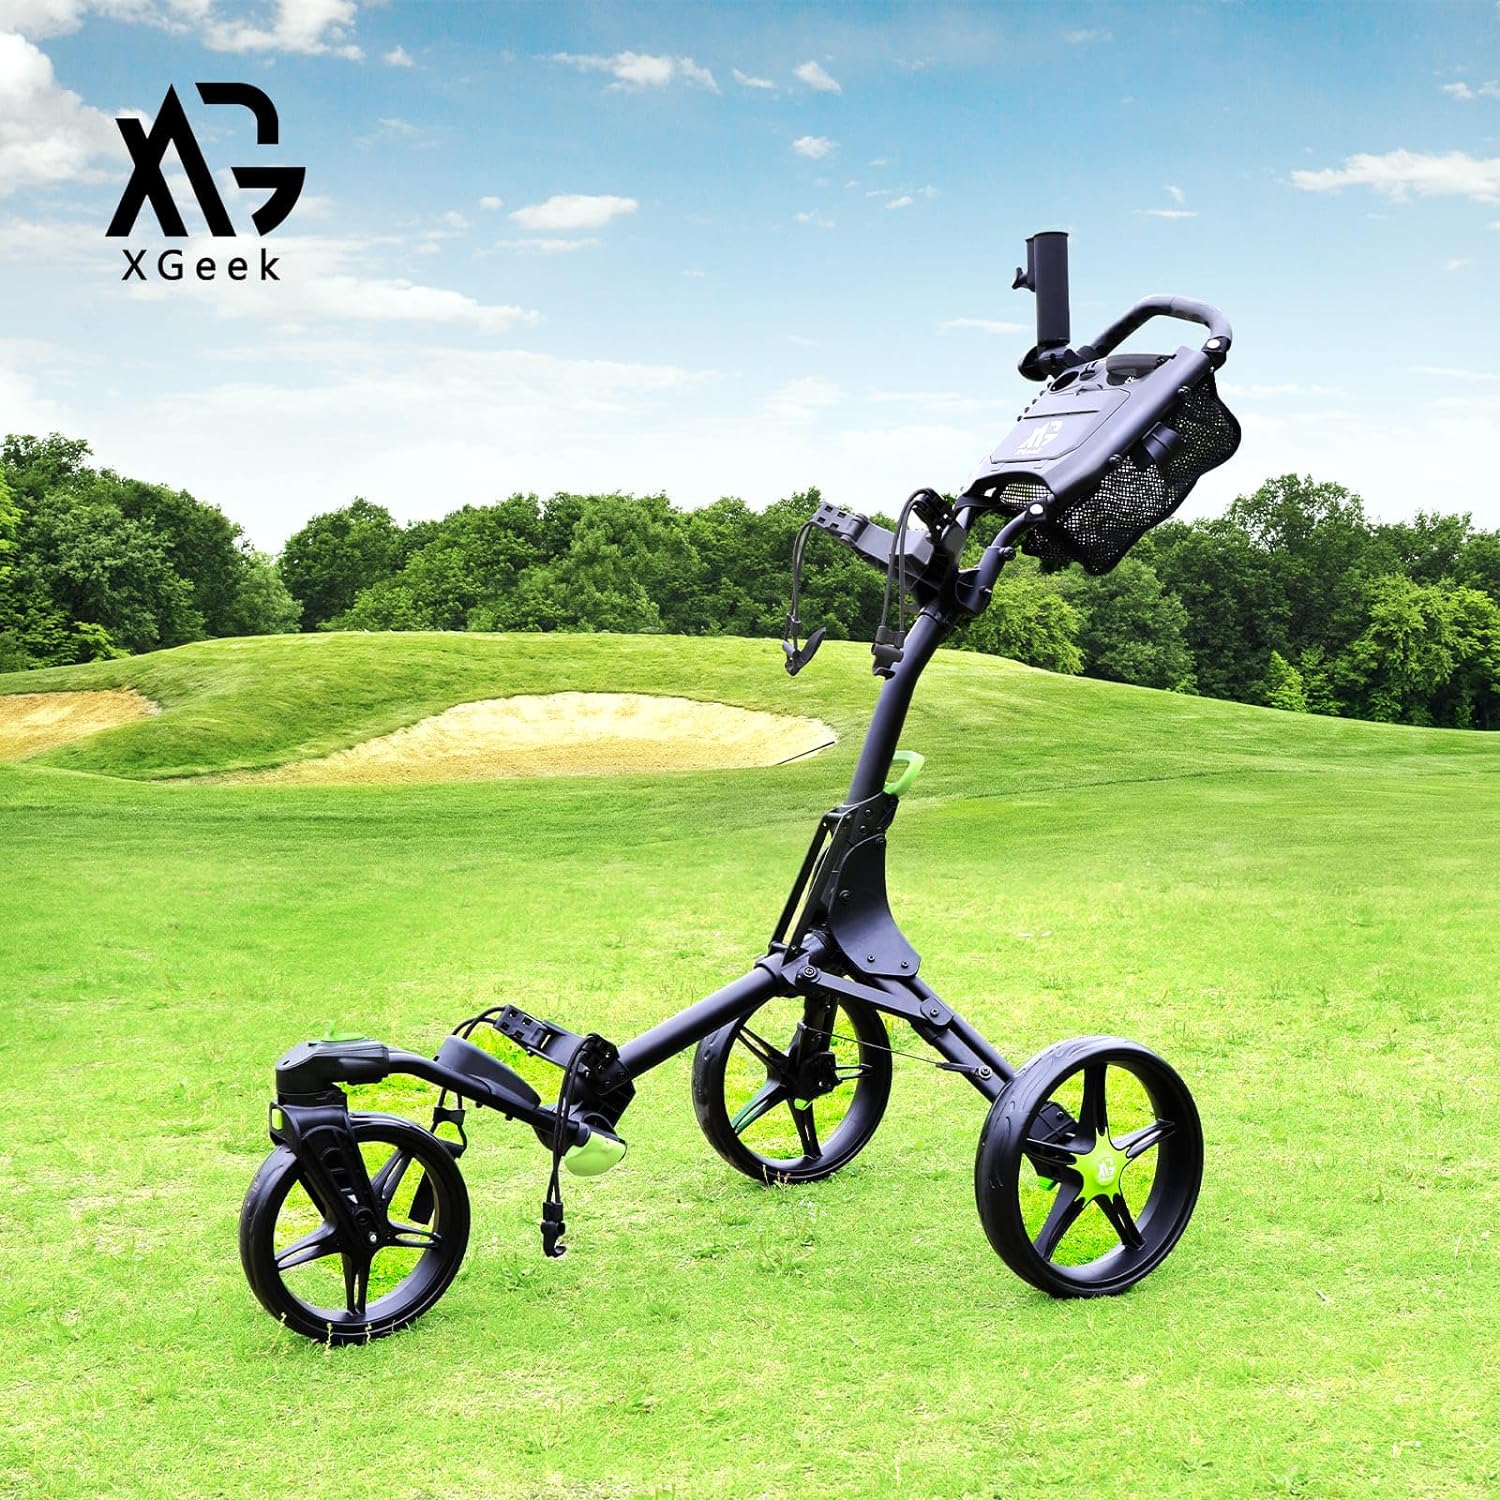 XGeek Golf Push Cart 3 Wheel,360 Rotating Front Wheel Foldable Golf Pull Cart for Golf Clubs,Carries Umbrella Stand and Premium Storage